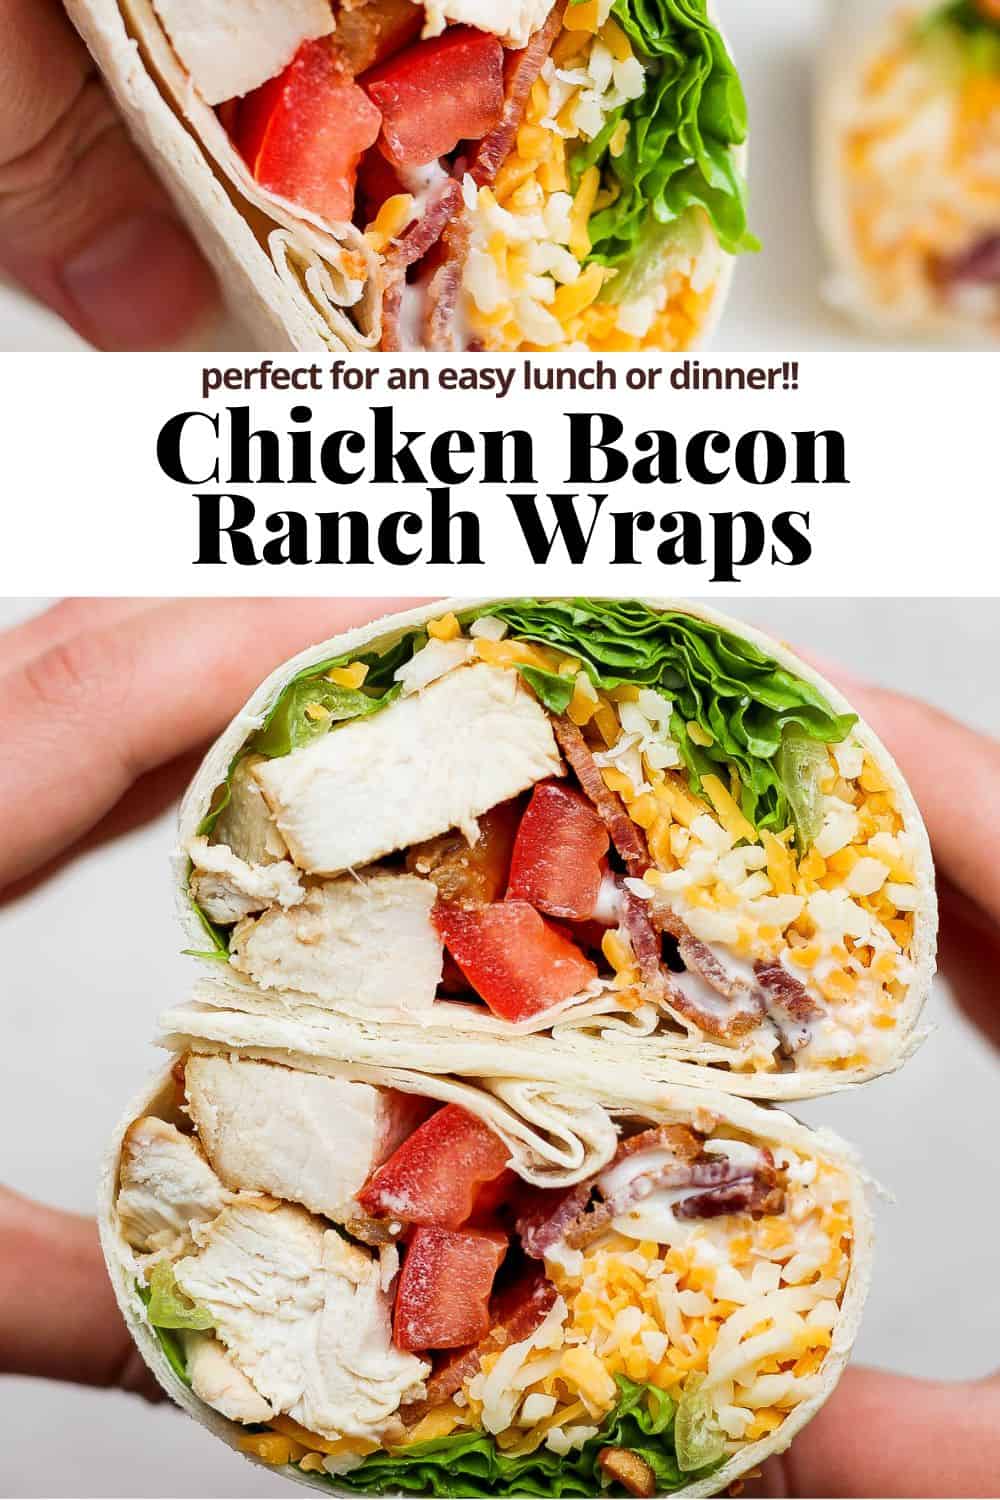 Pinterest image for chicken bacon ranch wrap.